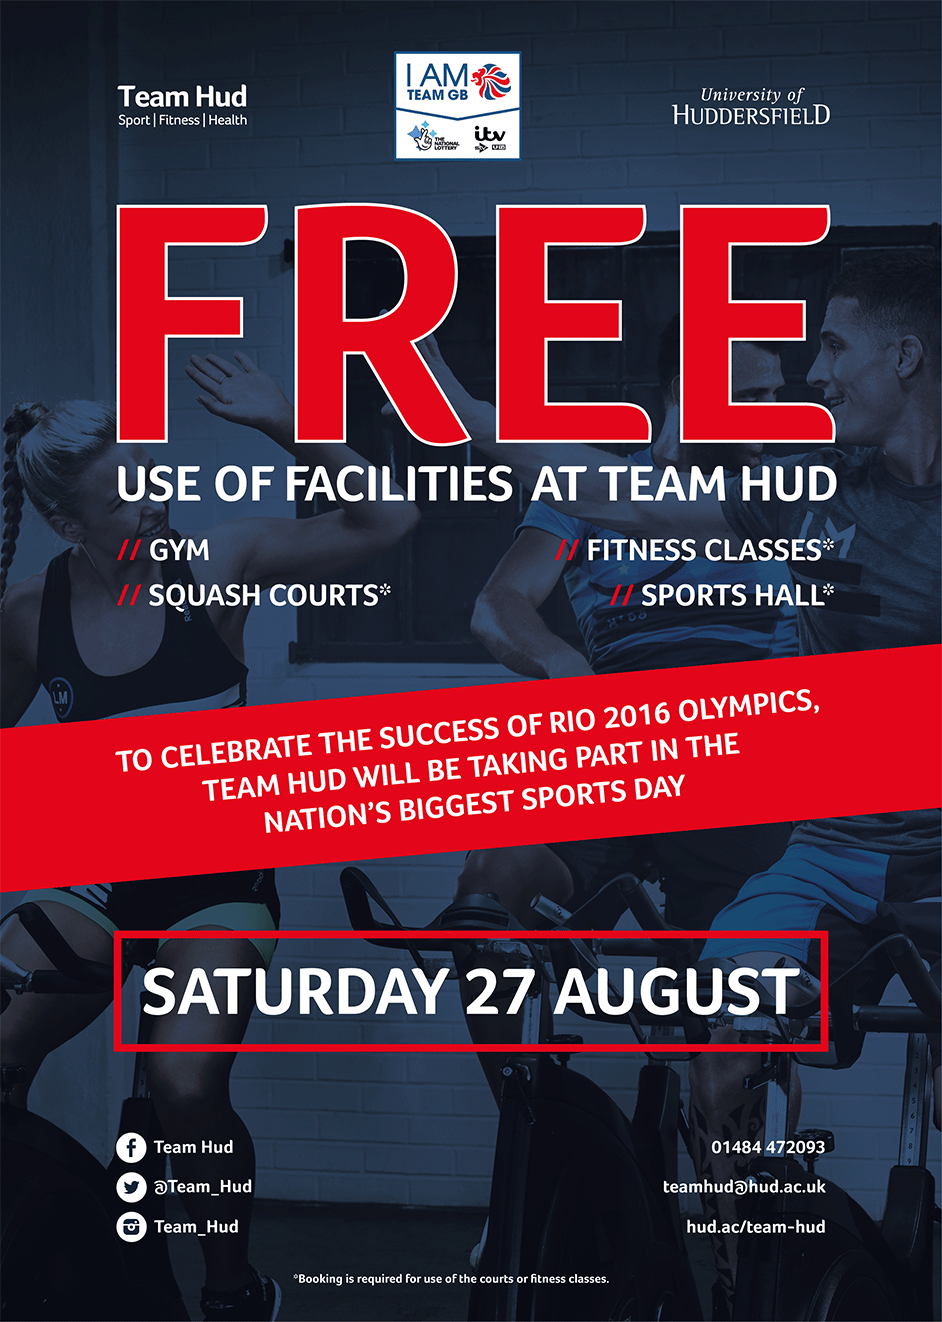 Team Hud I Am GB Poster for free gym use on Saturday 27 August